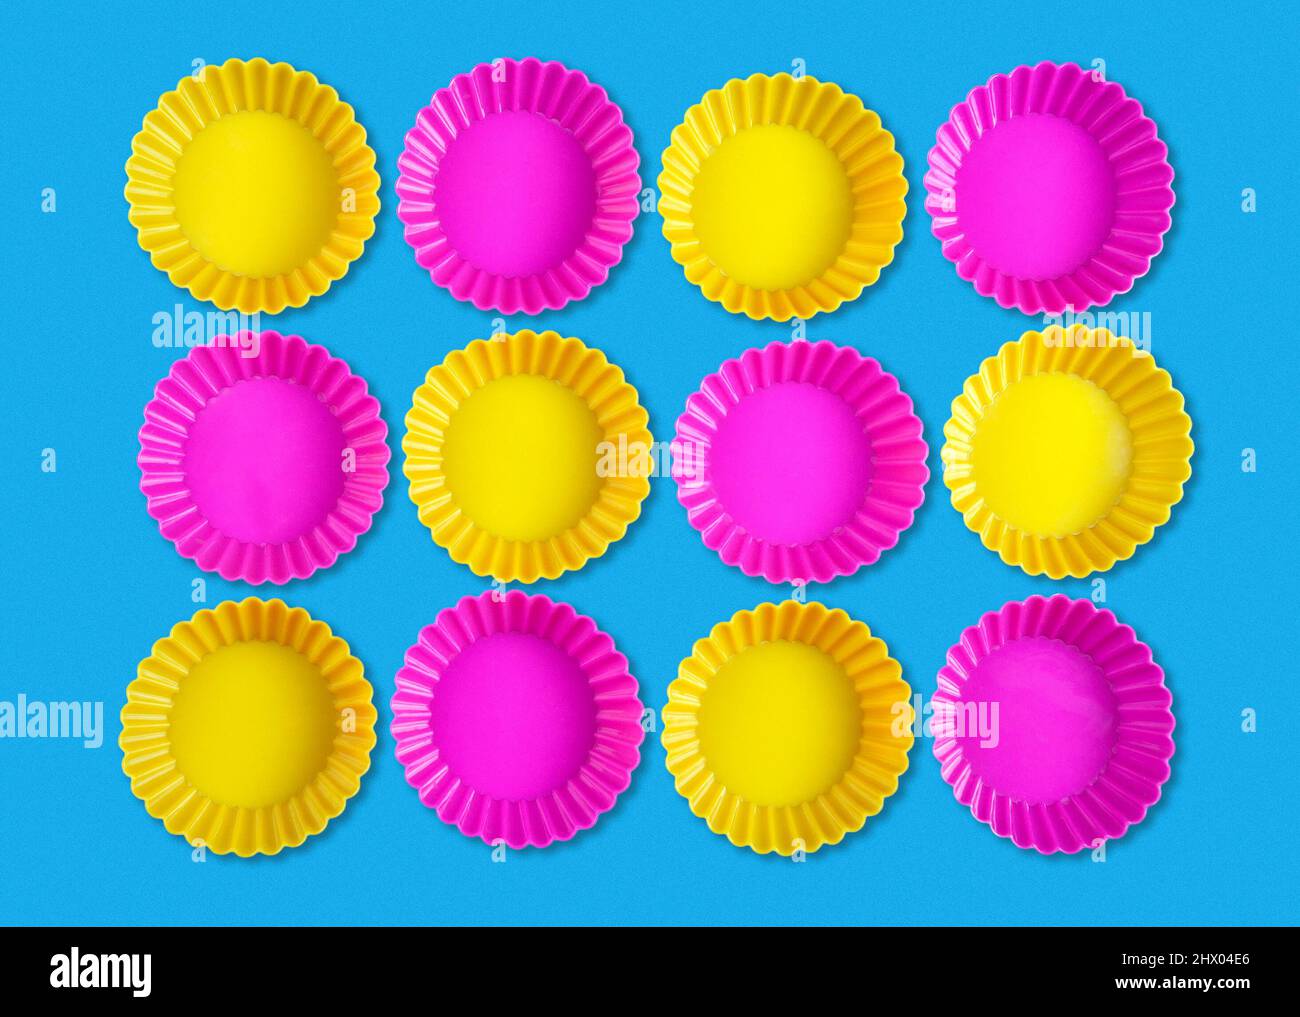 Abstract shapes background with group of yellow and pink rounded objects on blue background Stock Photo